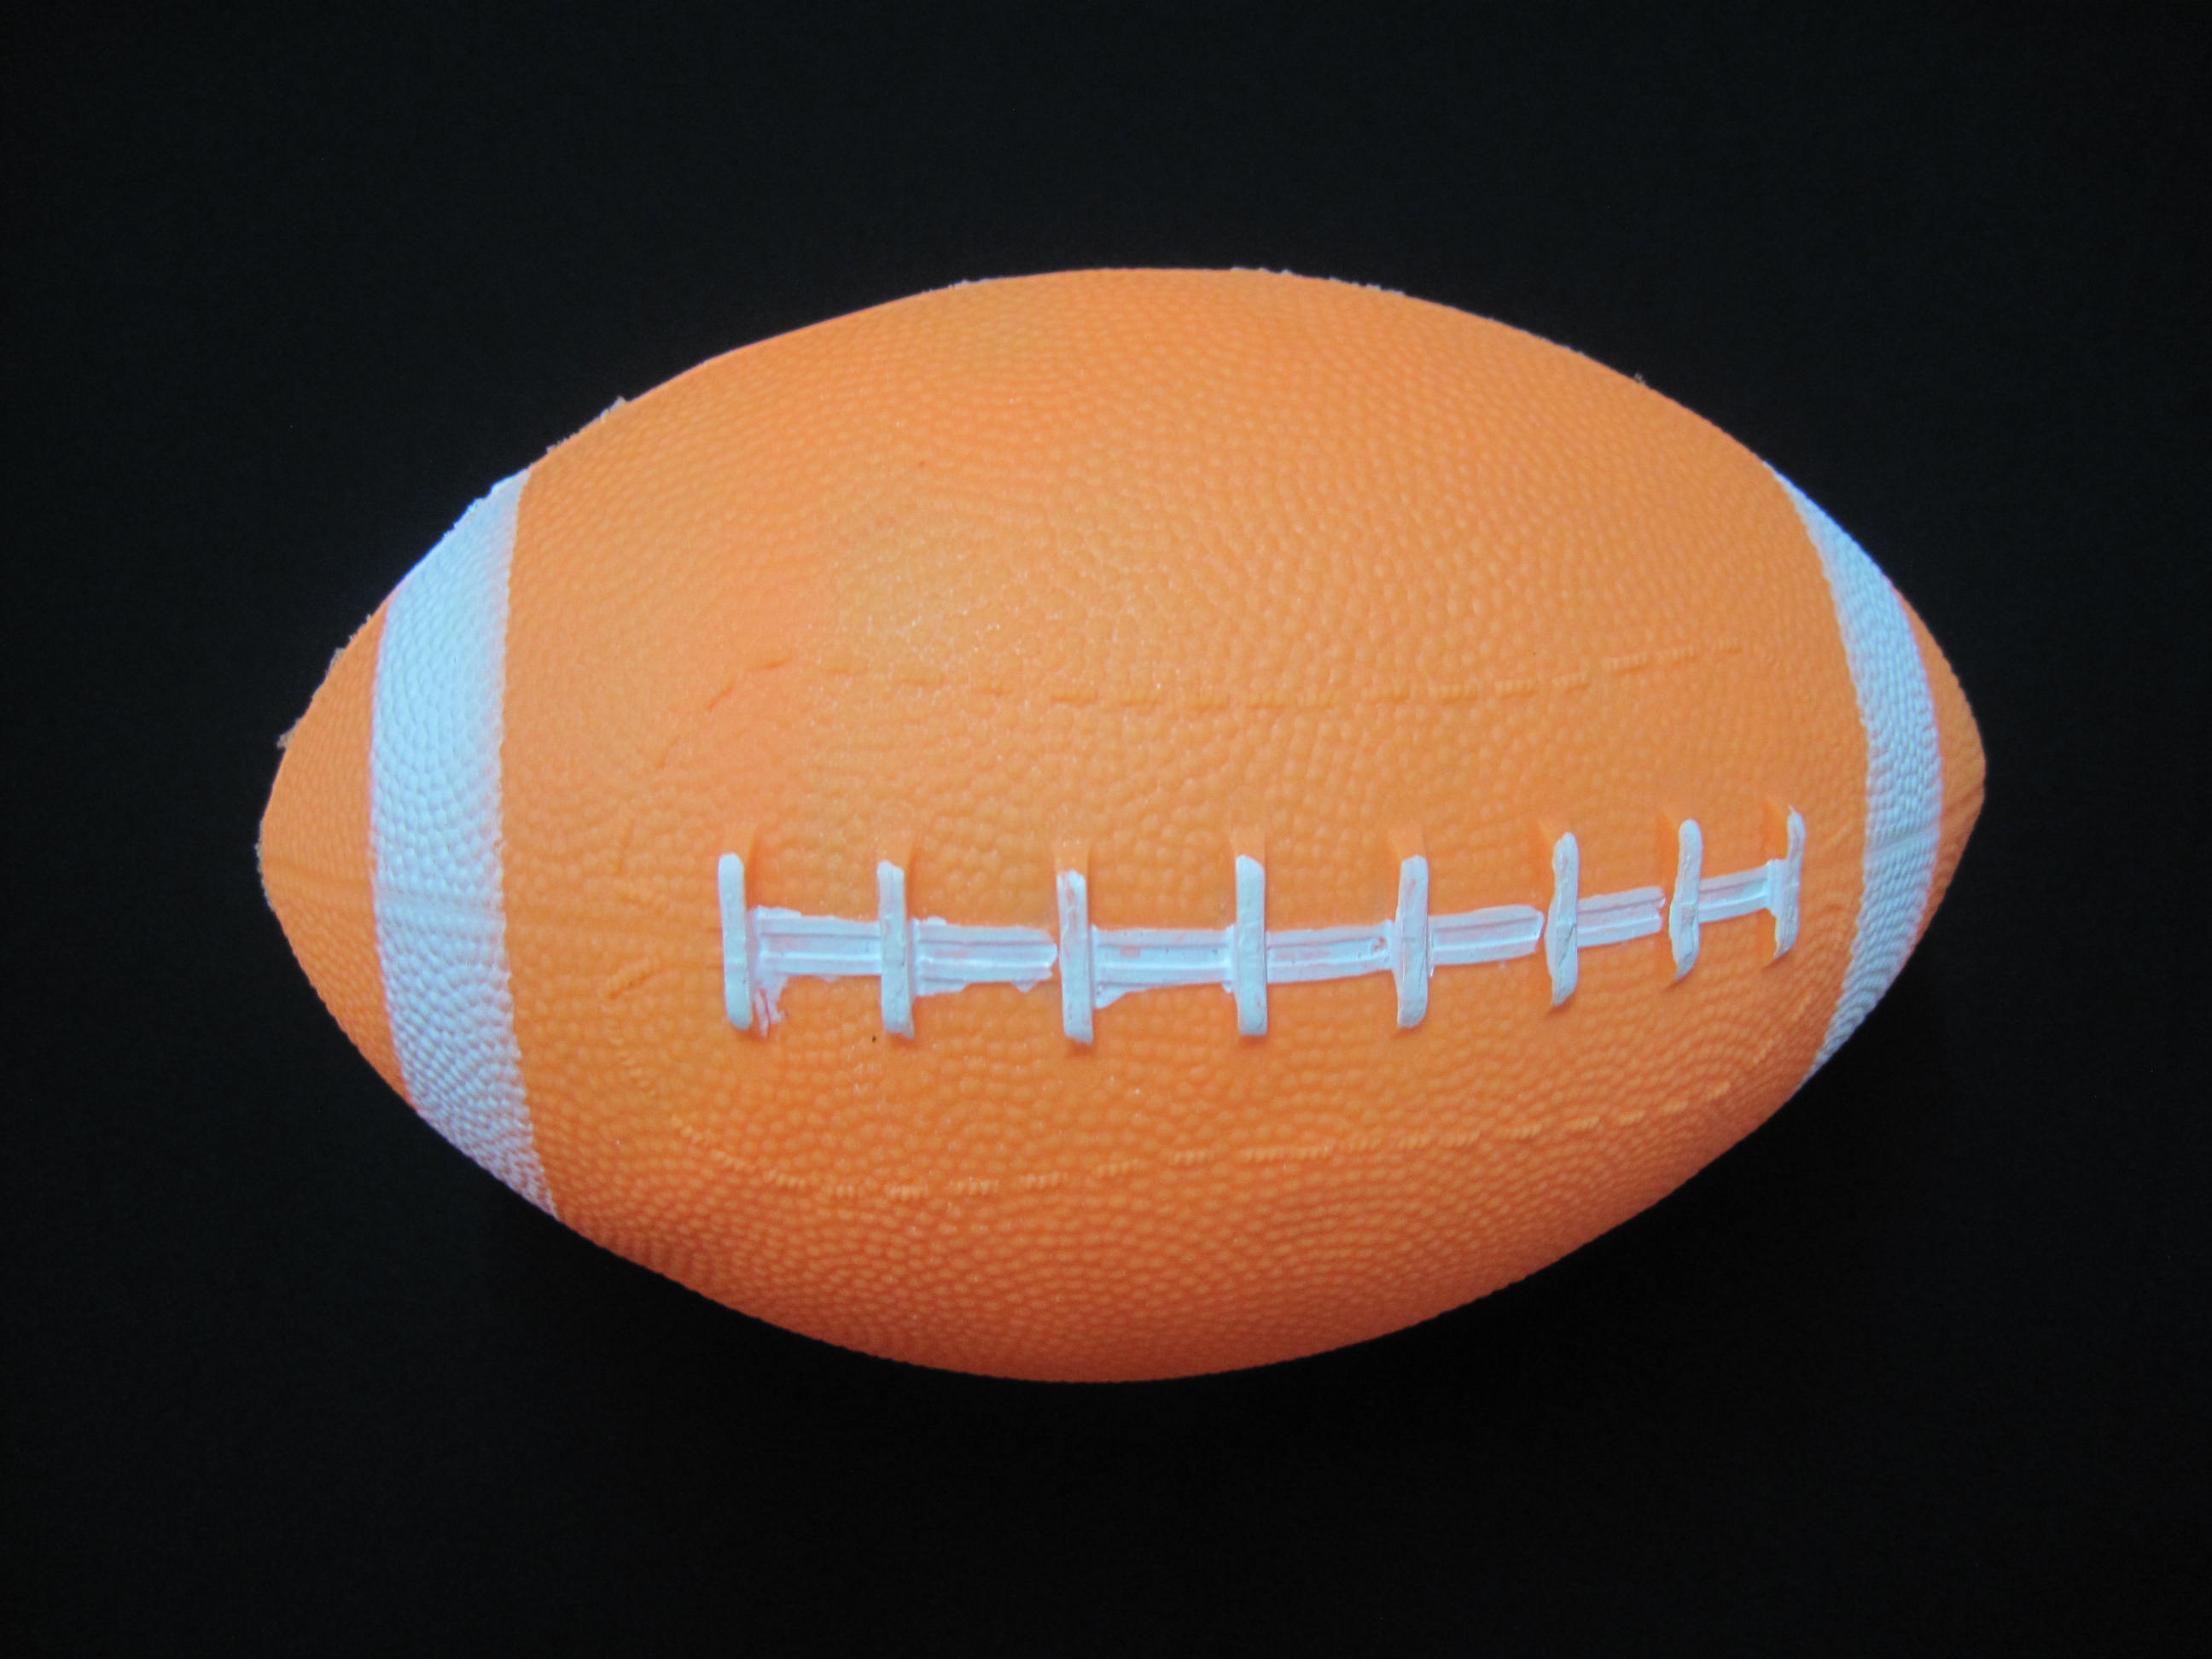 American Football / Rugby Ball–PVC custom, comes in different designs